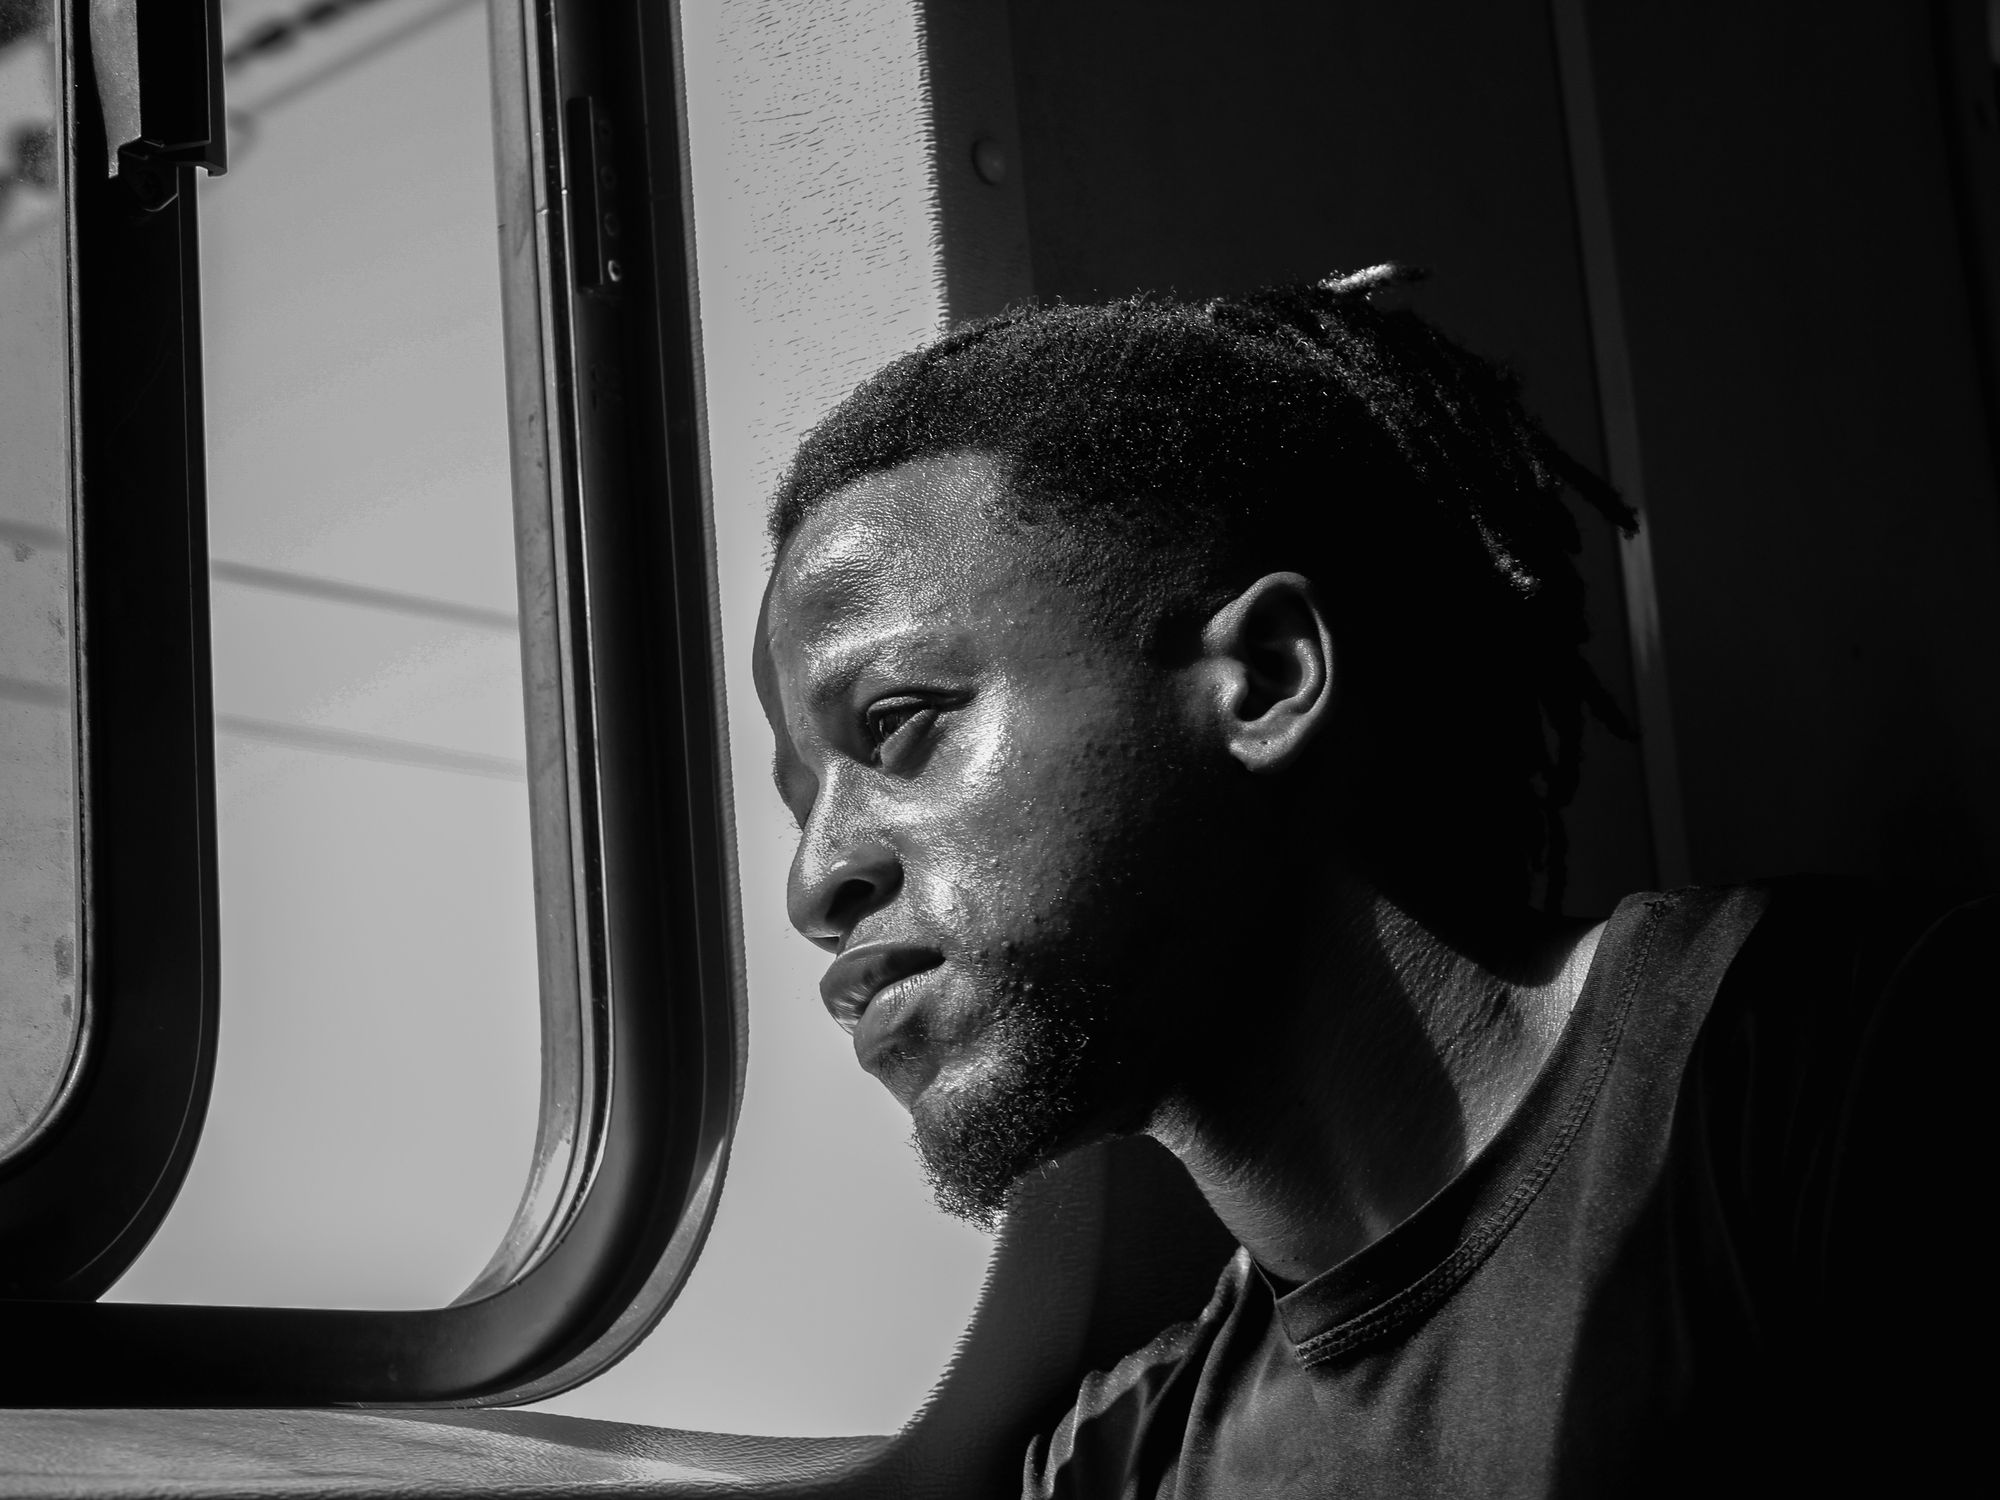 'Journey With Me' Is a Window Into the Ups and Downs of Traveling by Train In South Africa